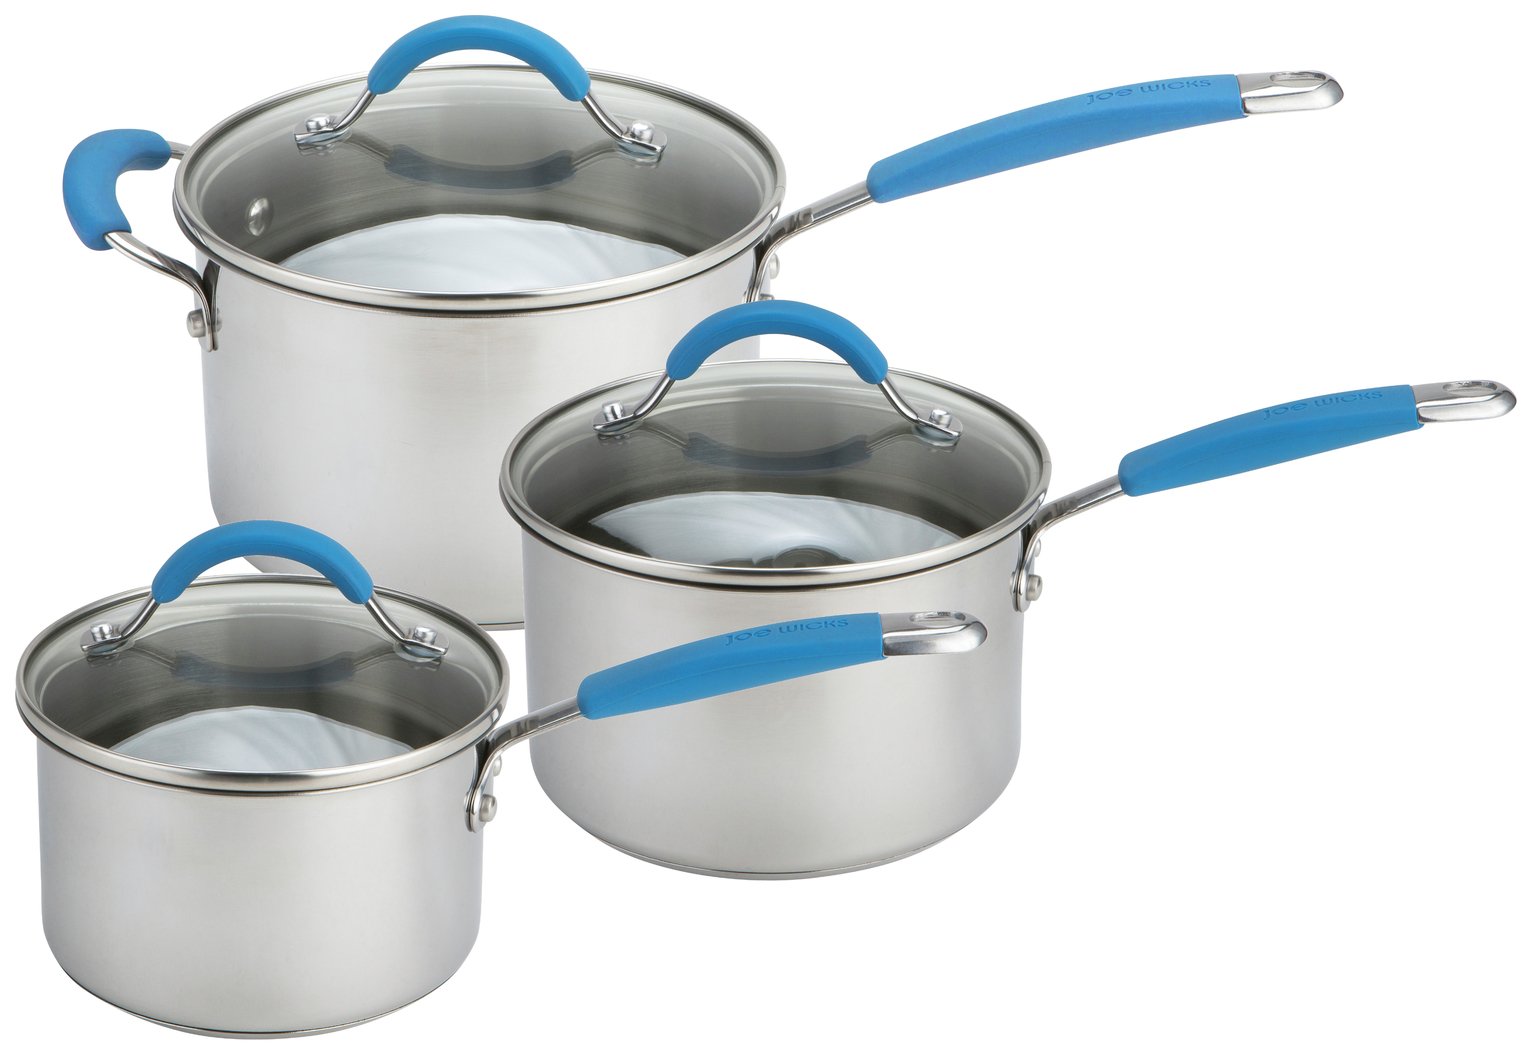 Joe Wicks Quick and Even Stainless Steel 3 Piece Pan Set